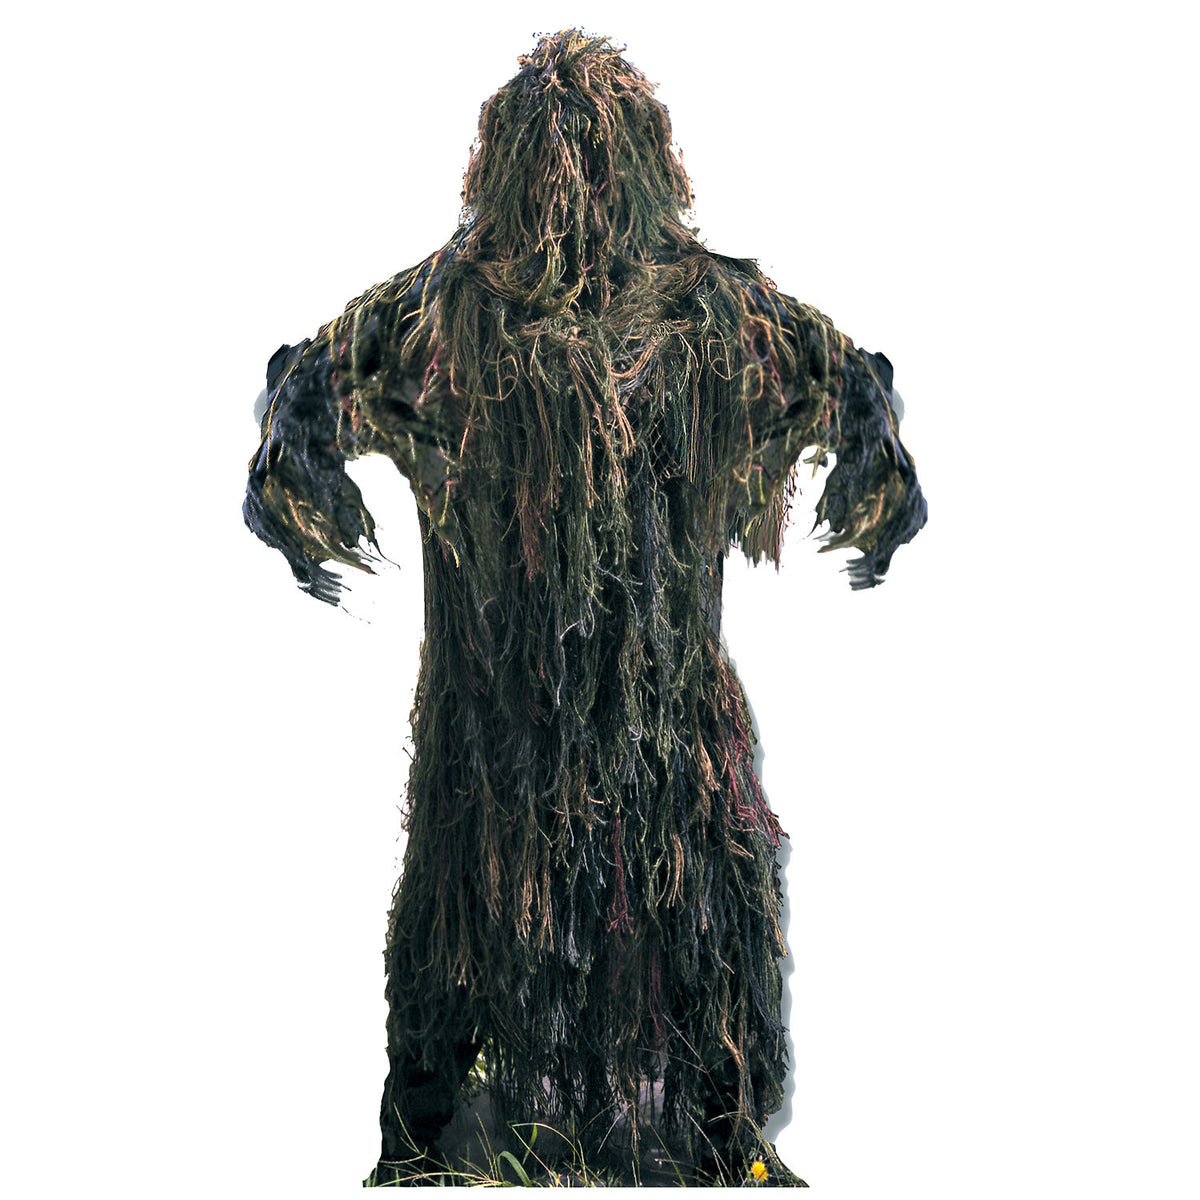 Rothco Lightweight All Purpose Ghillie Suit